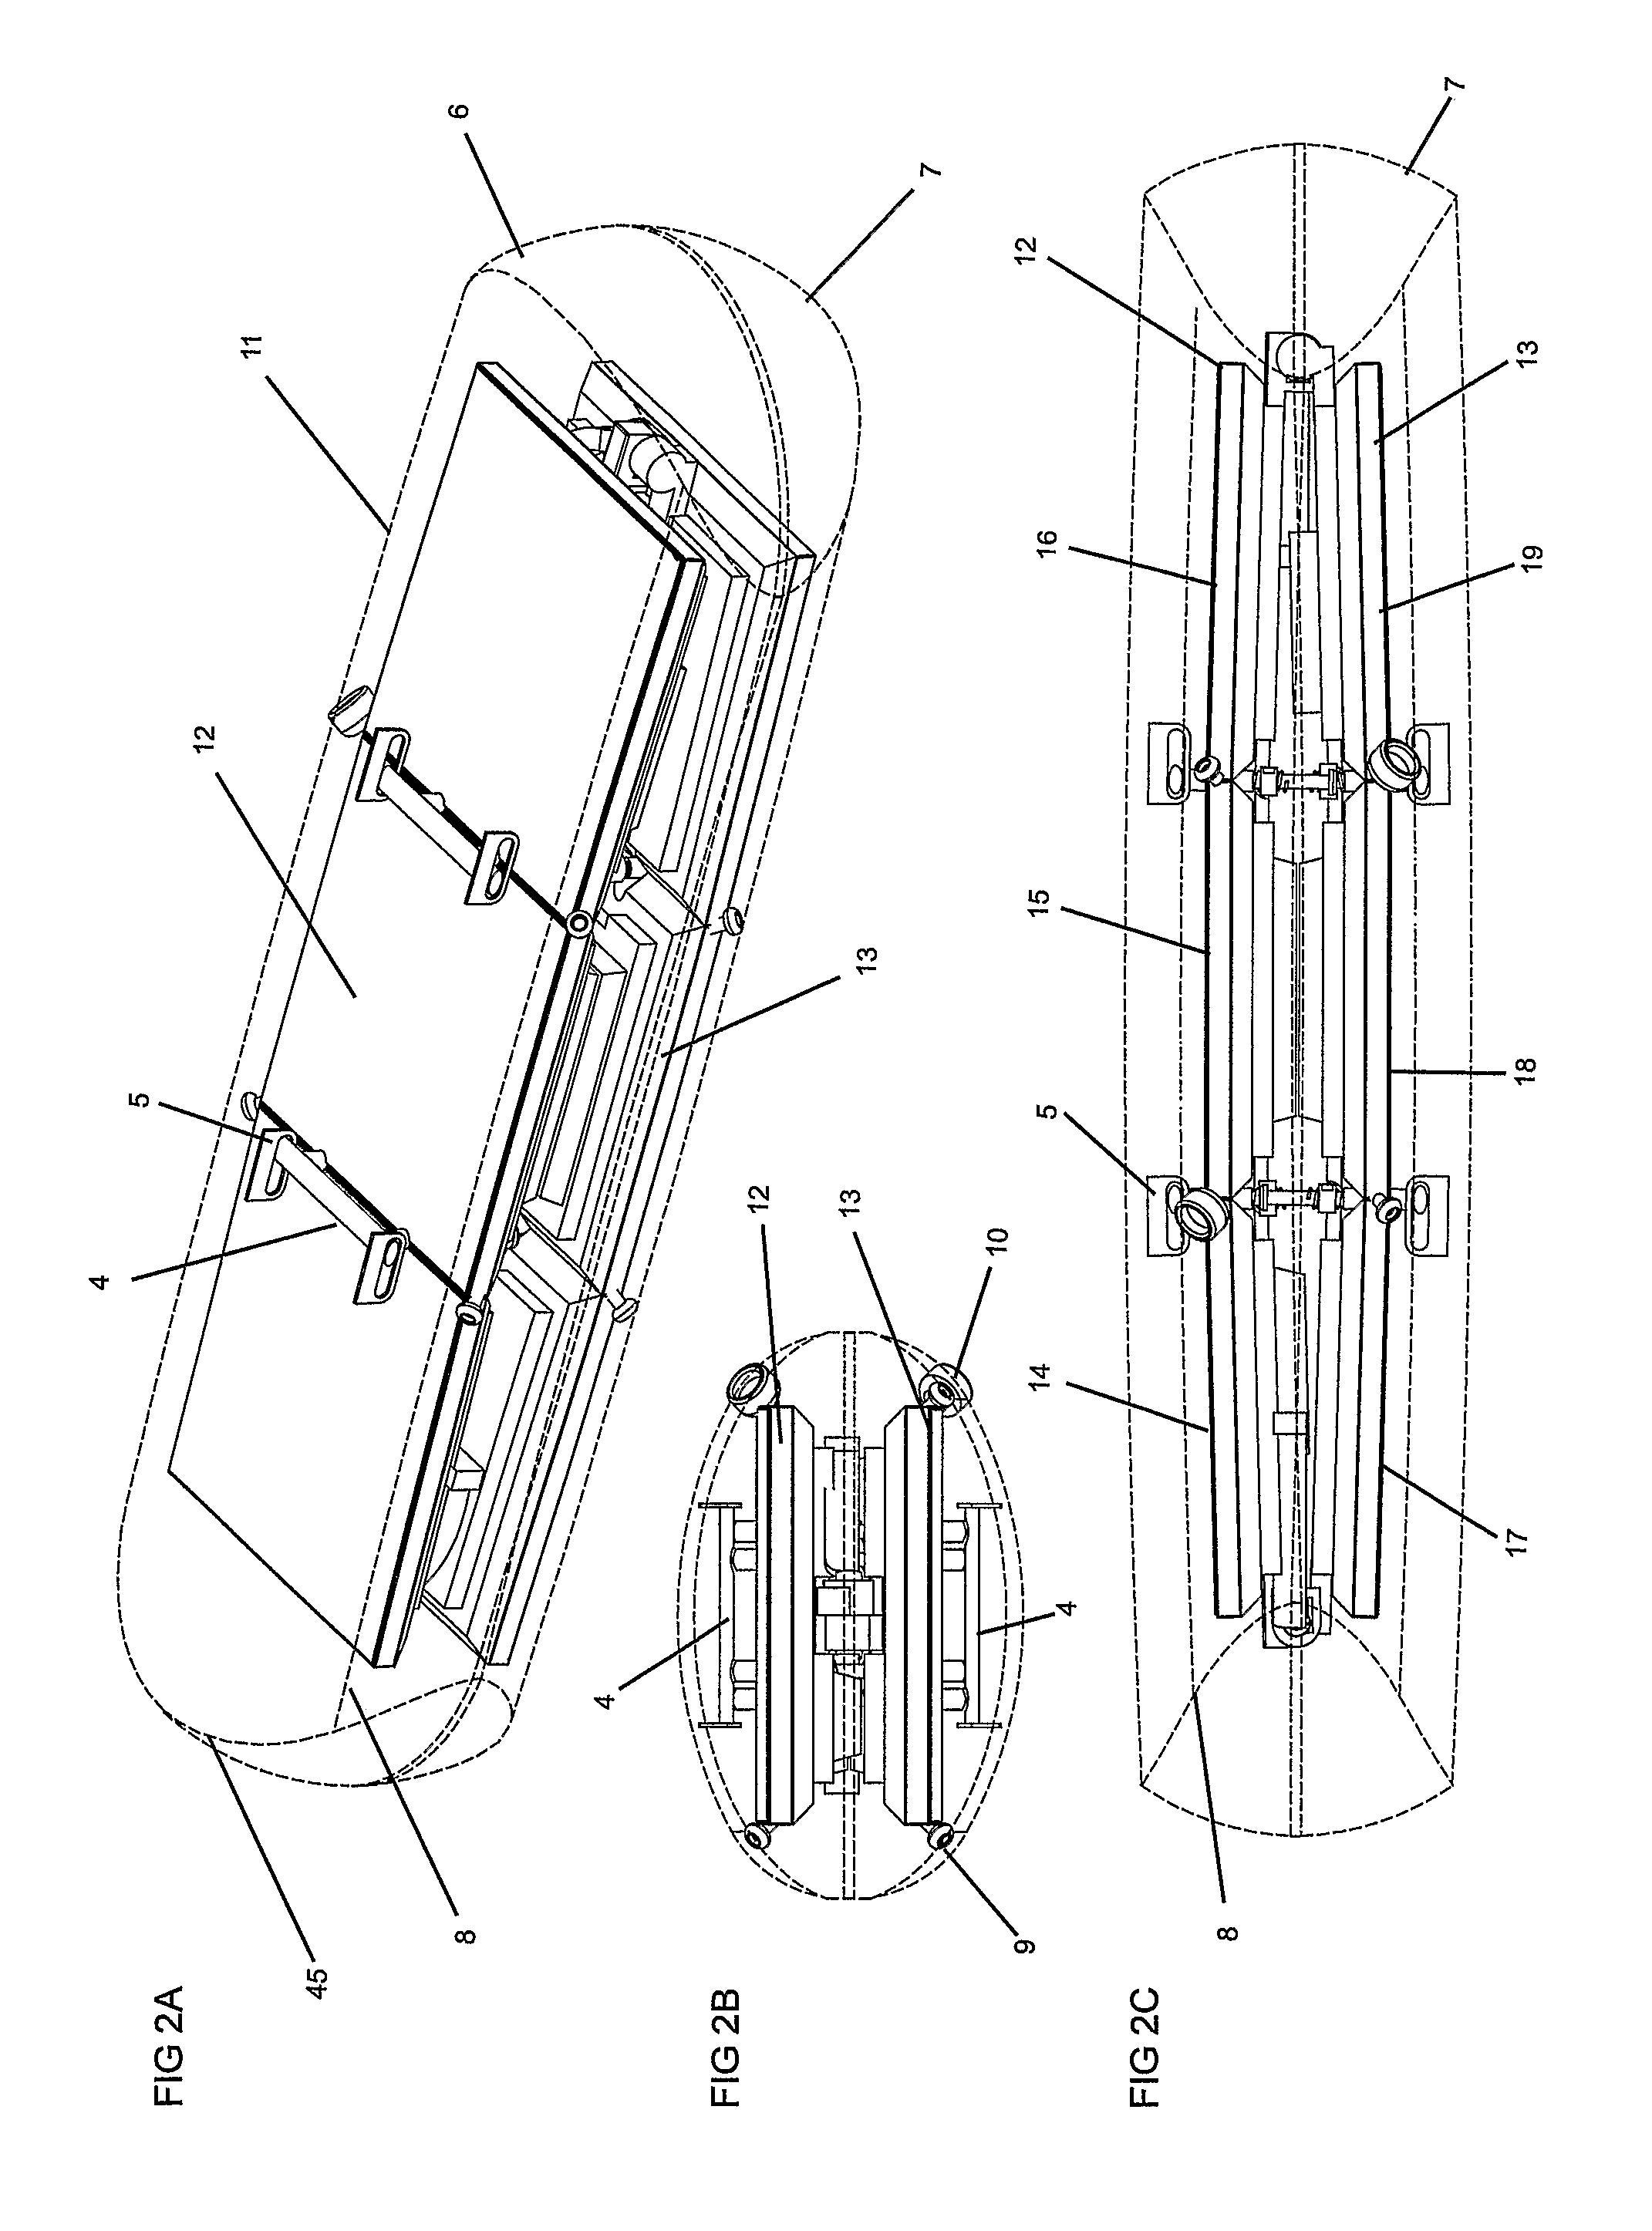 Spherical display and control device